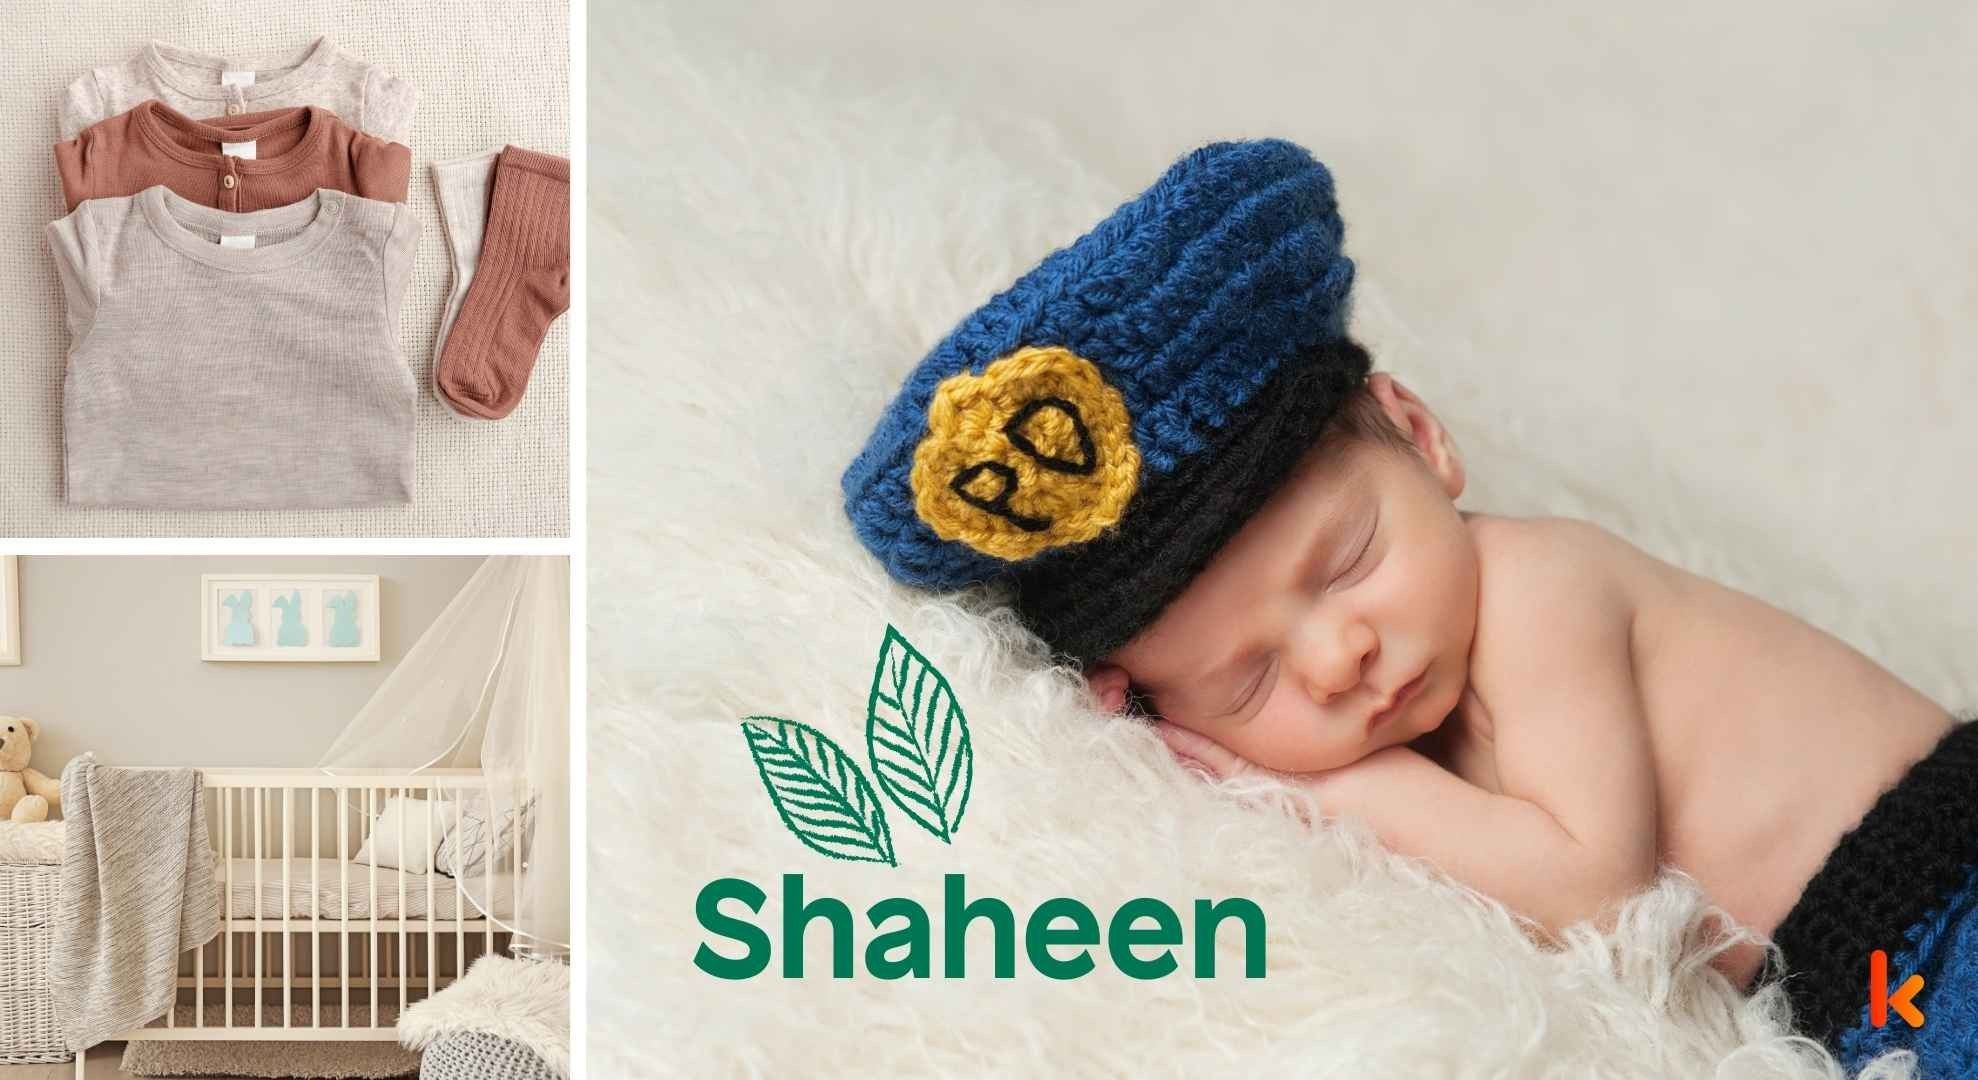 Meaning of the name Shaheen